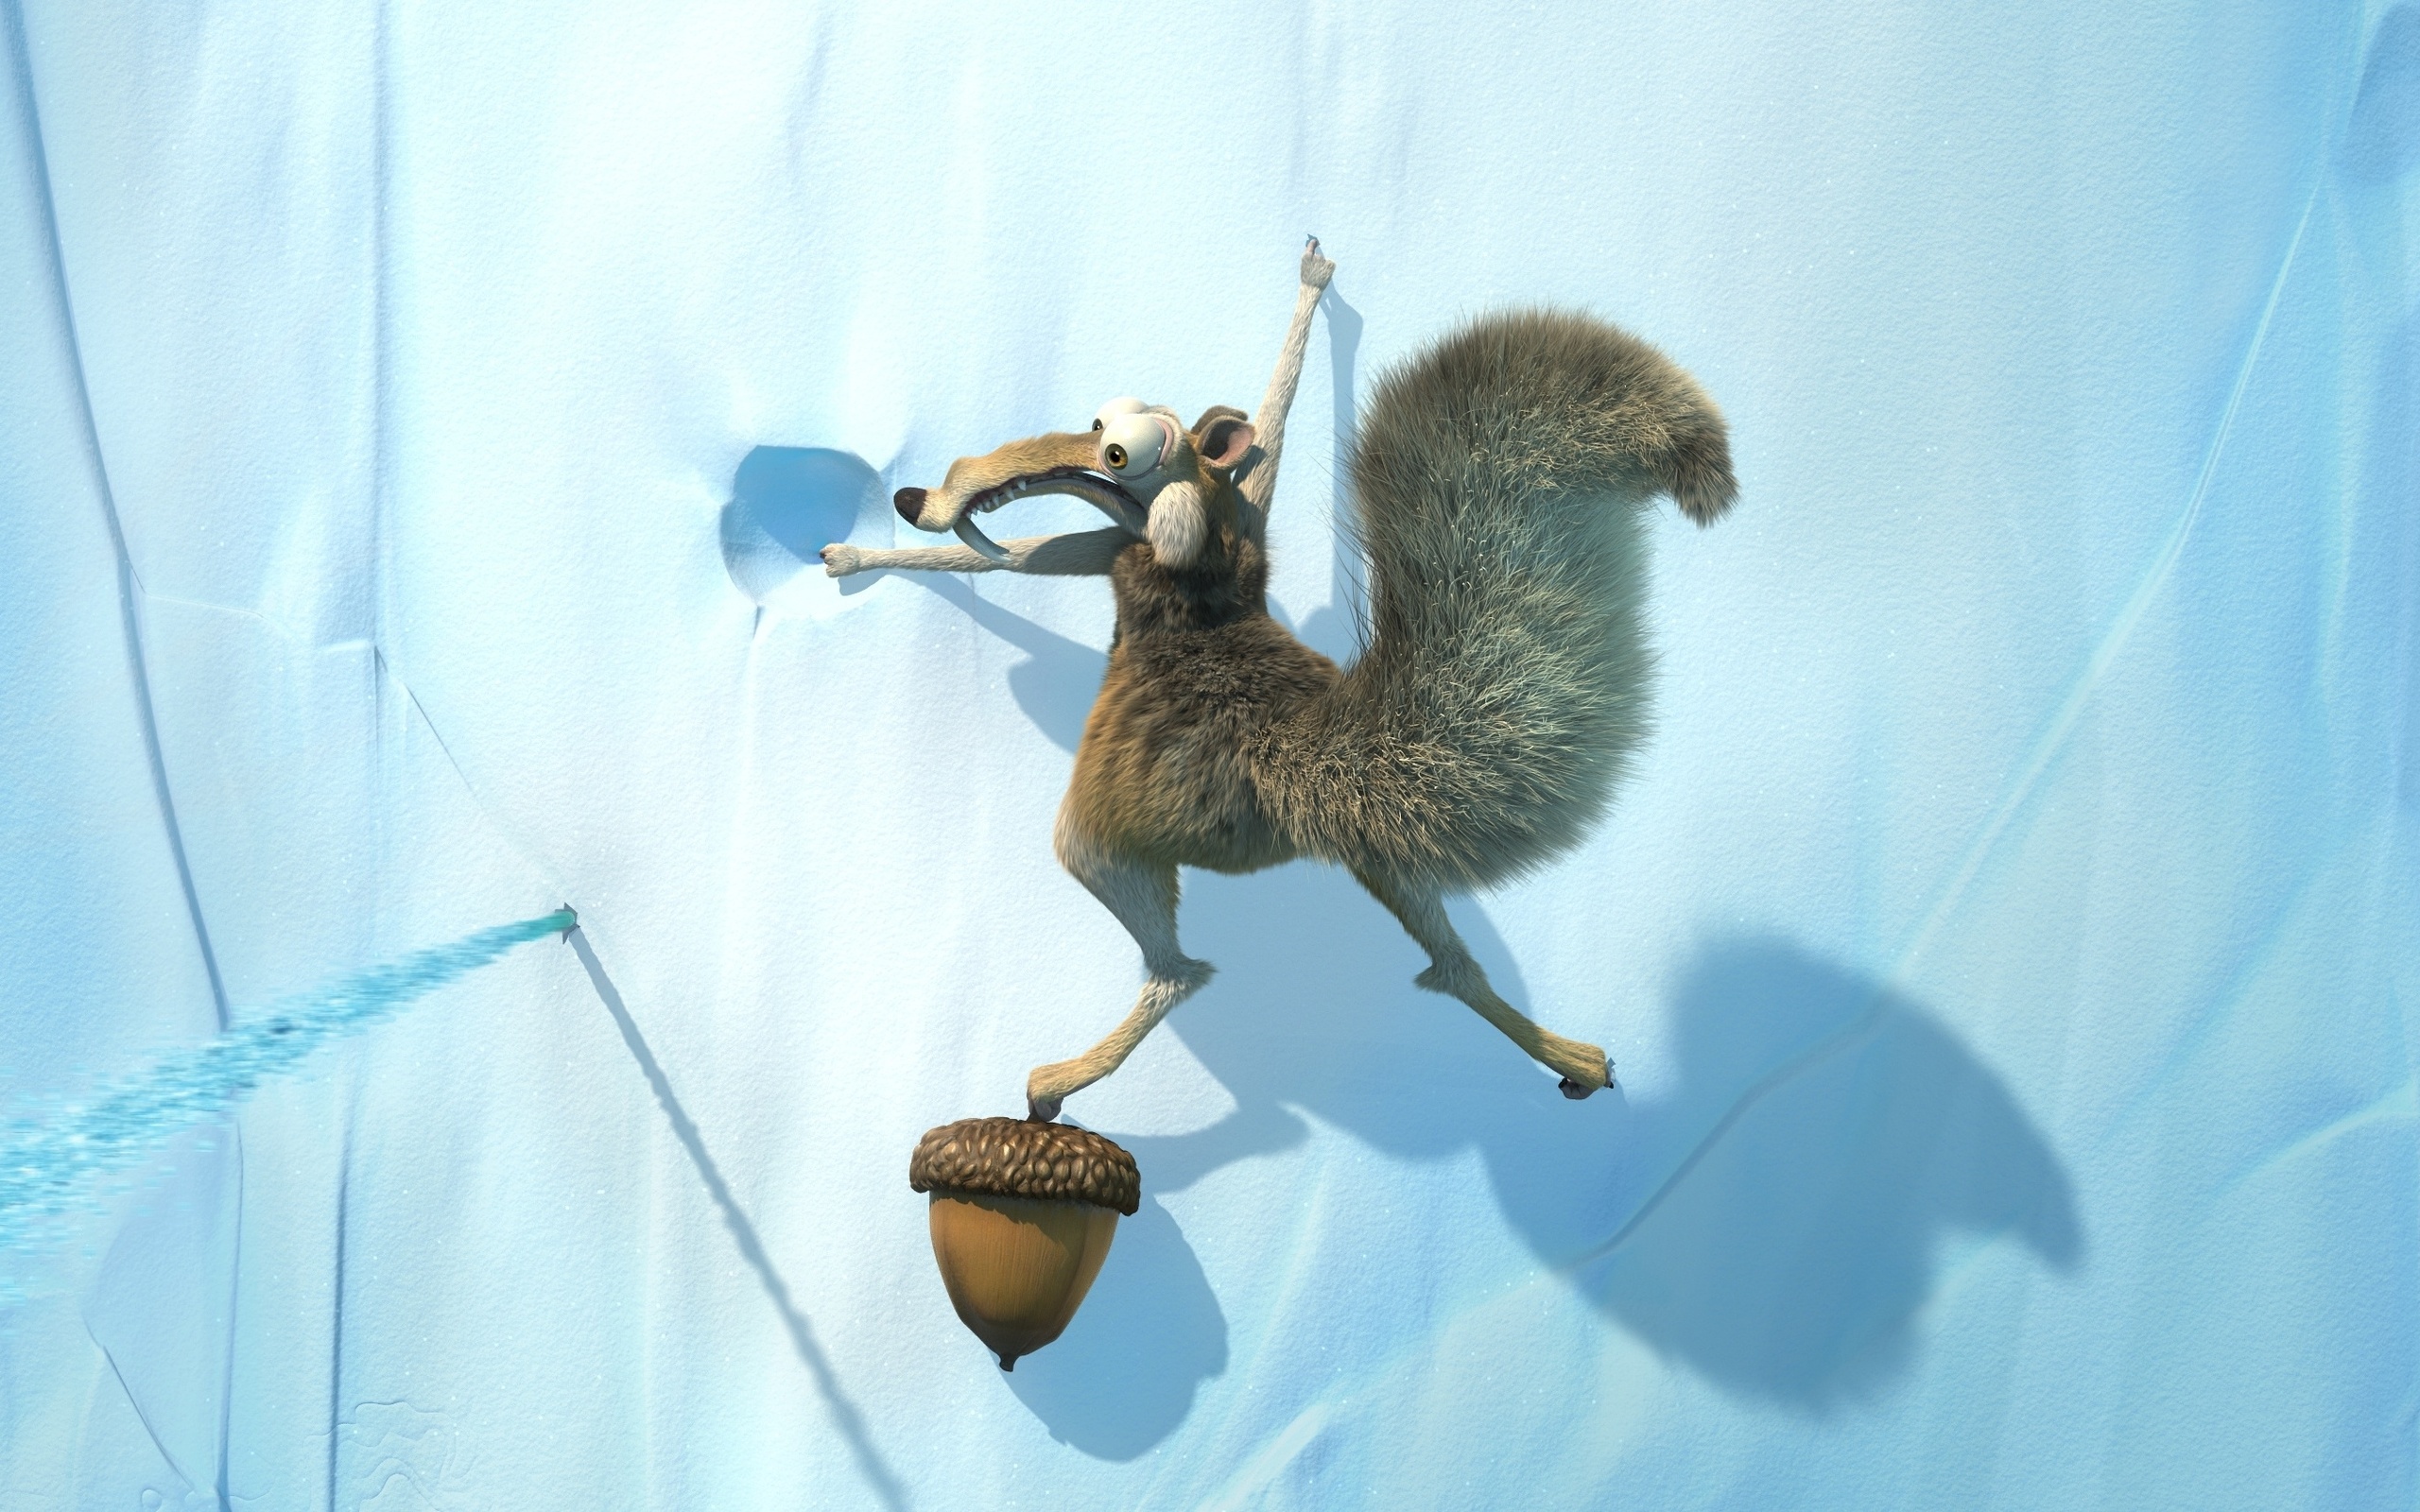 Movie Ice Age HD Wallpaper | Background Image